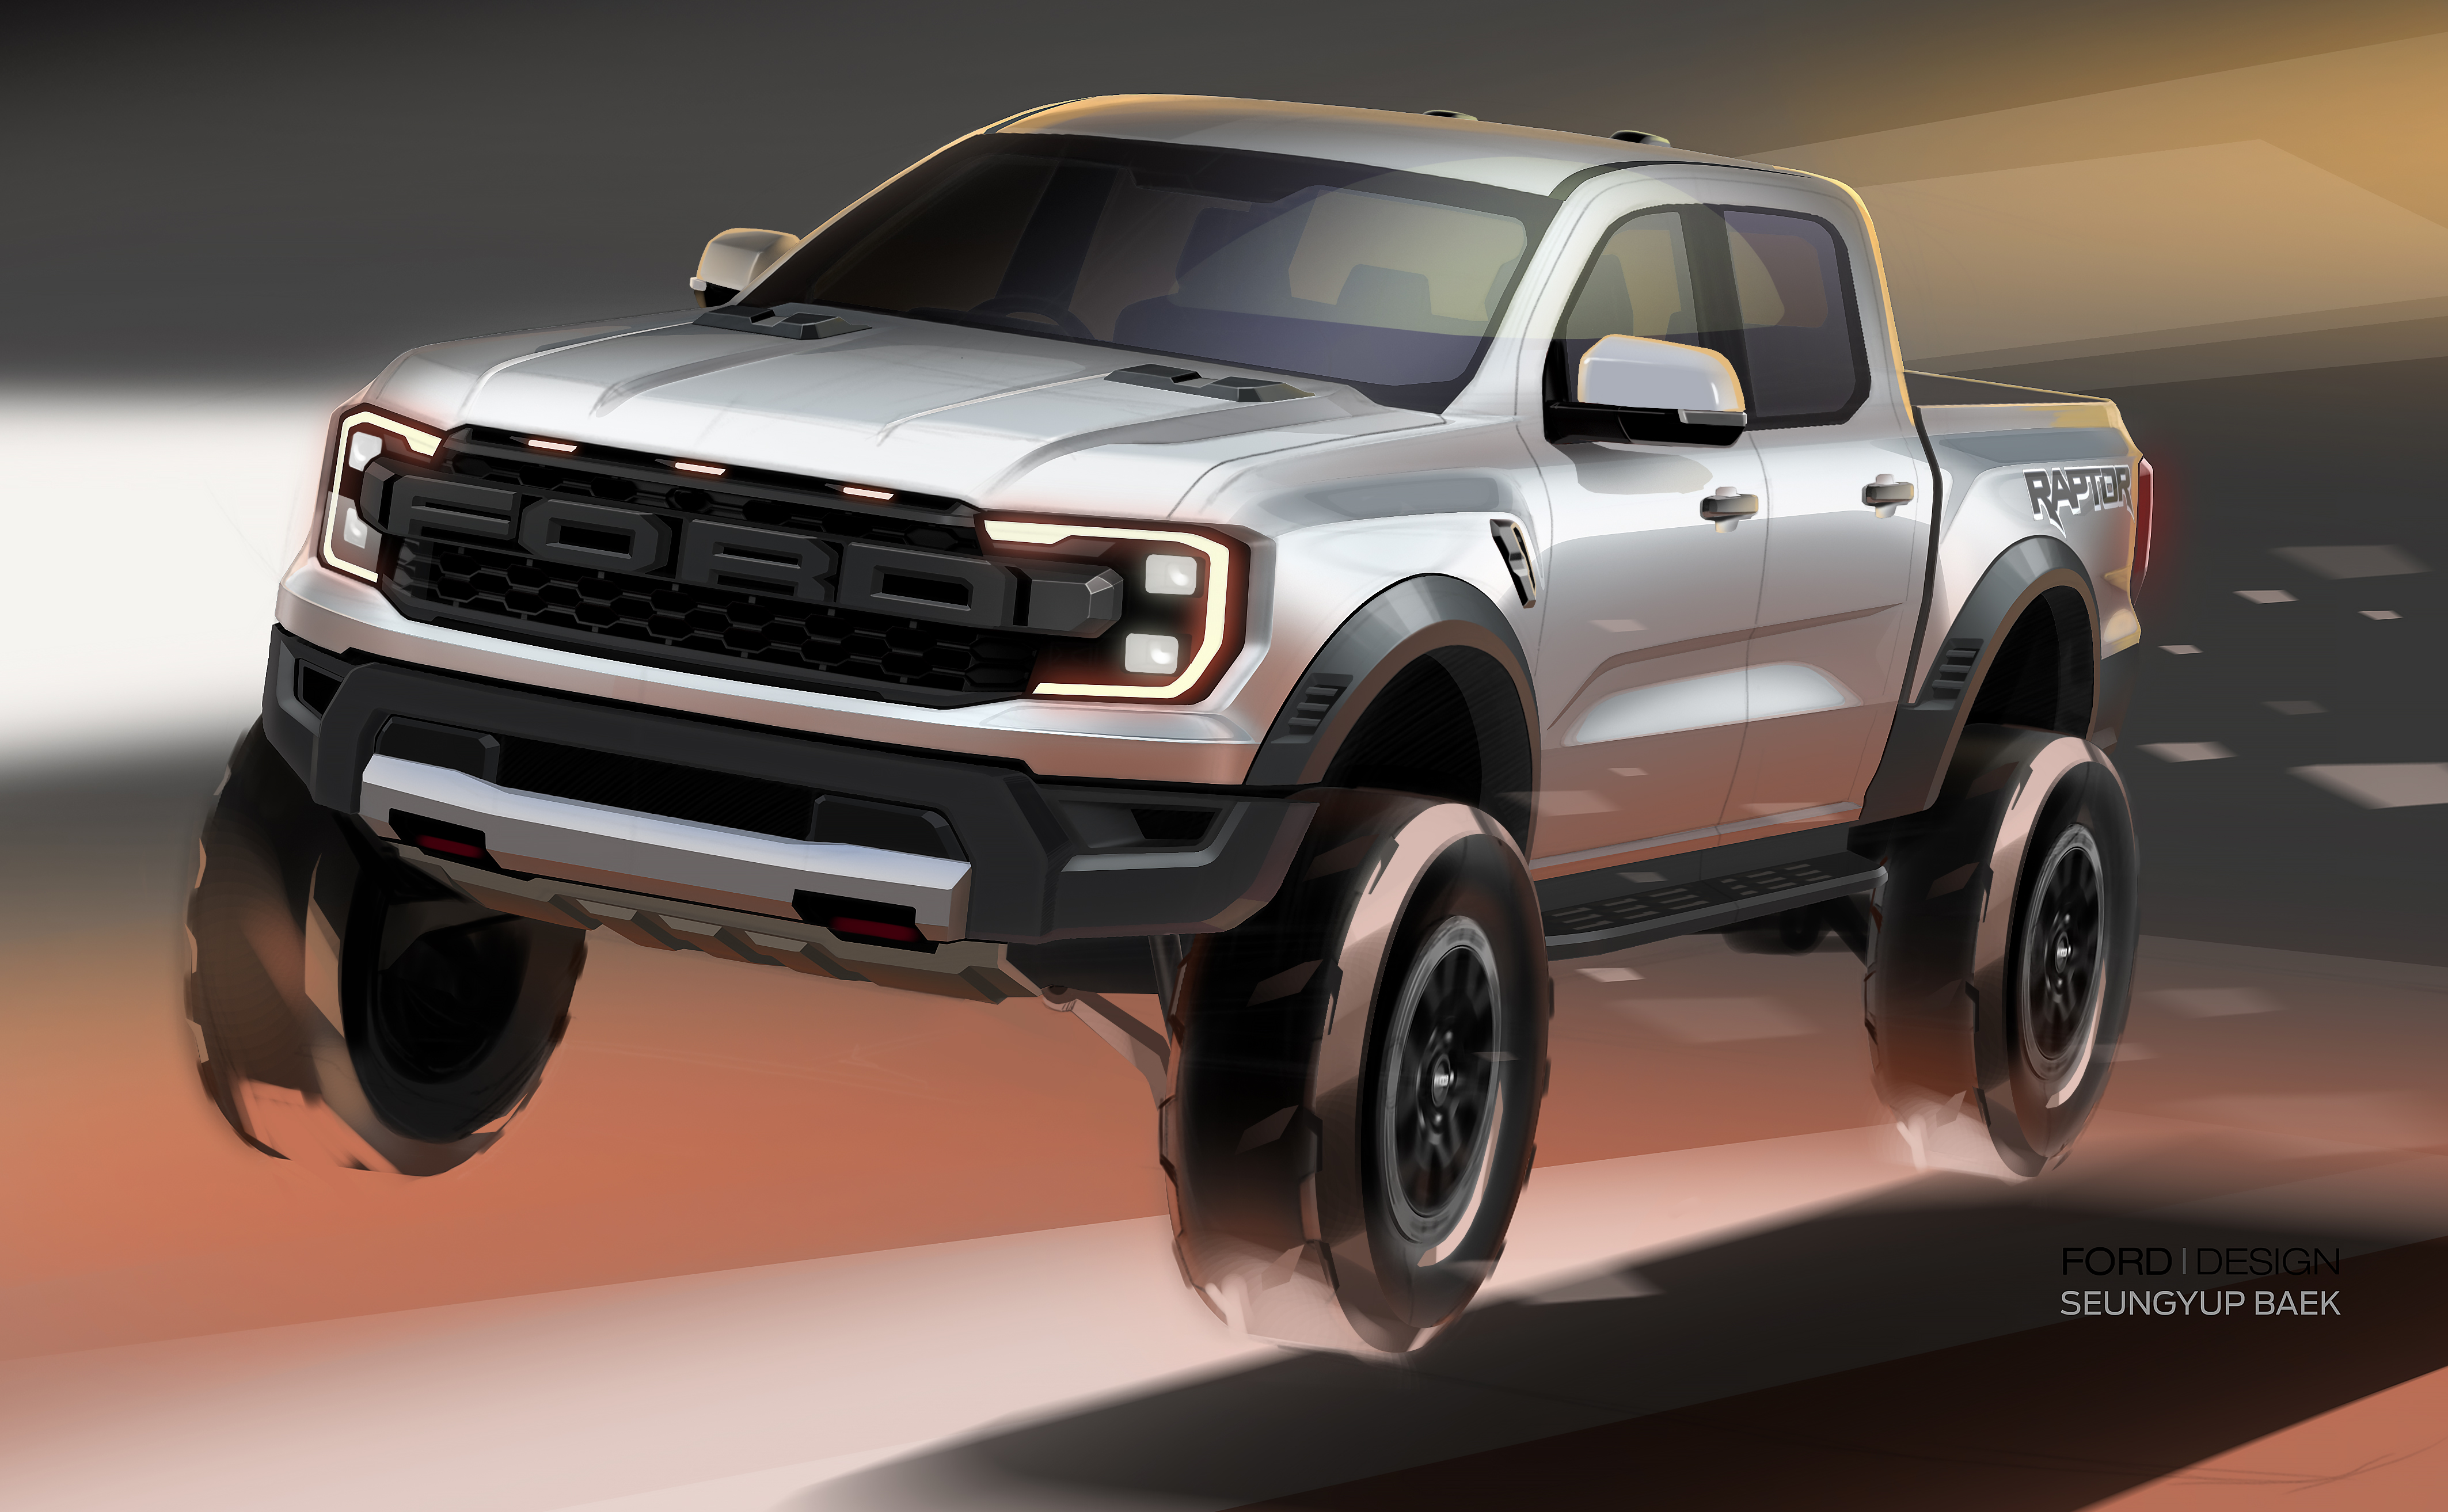 Ford reveals redesigned Ranger truck with new Raptor performance model